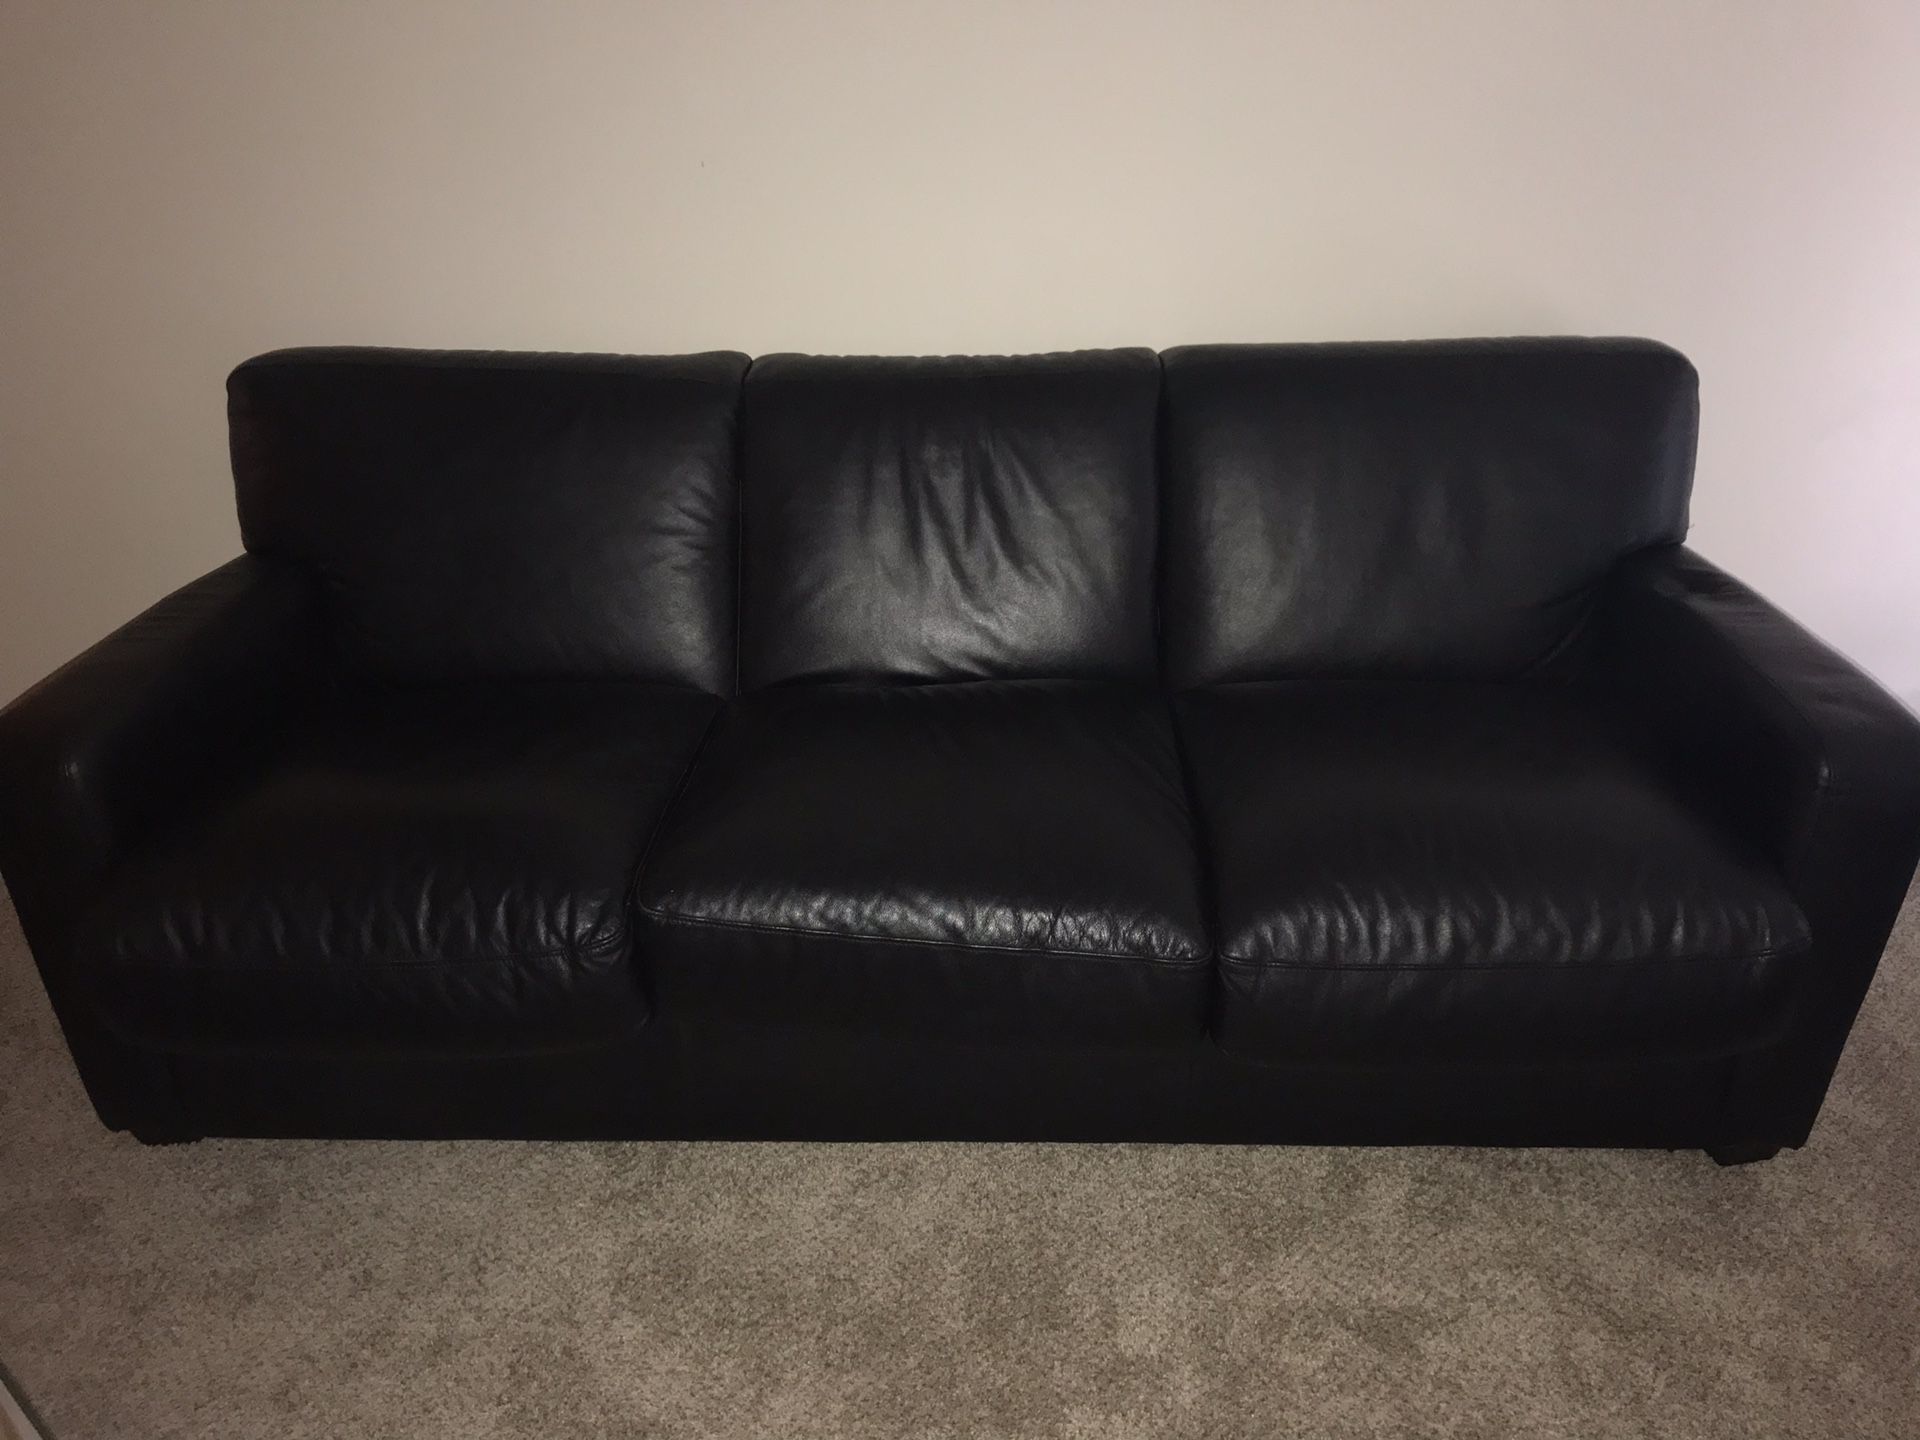 Black leather fold out couch